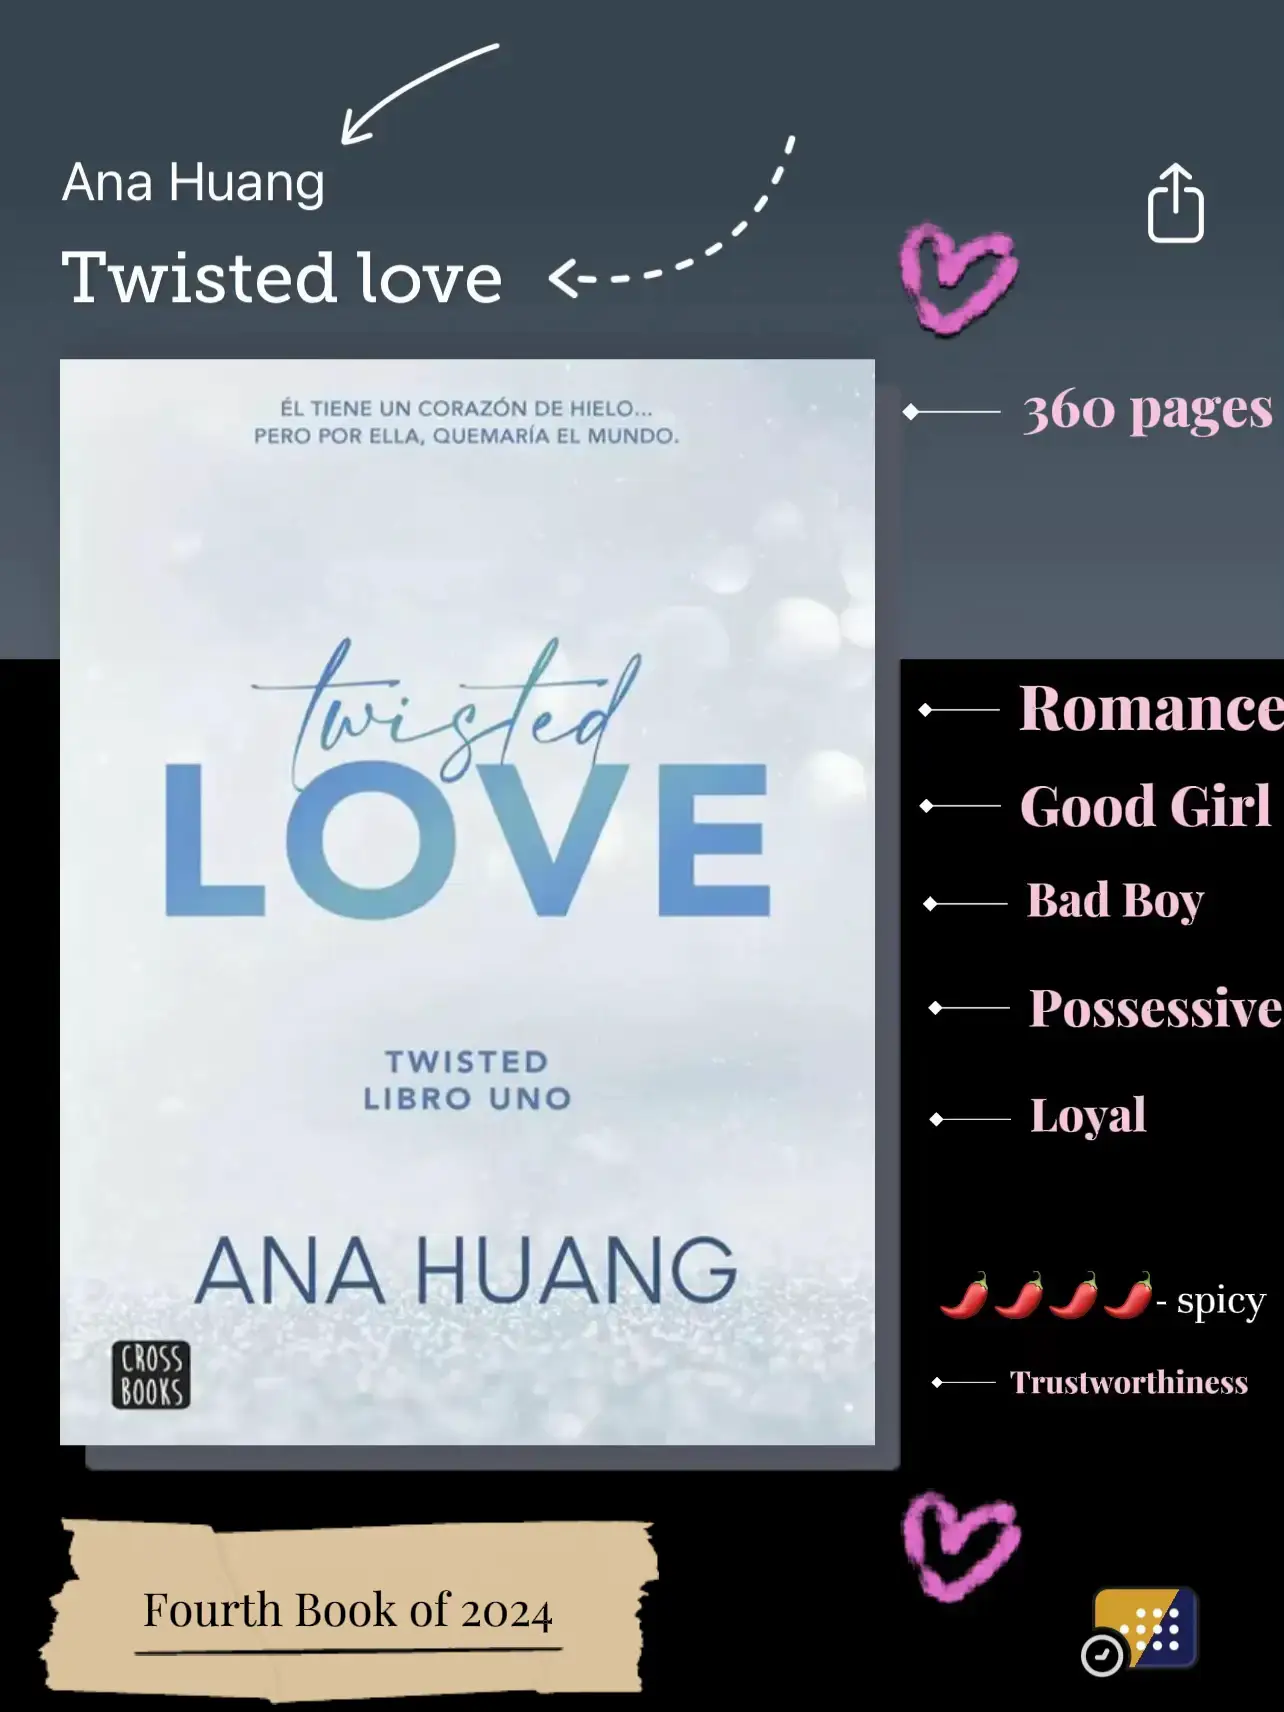 TWISTED 2. TWISTED GAMES, ANA HUANG, Crossbooks